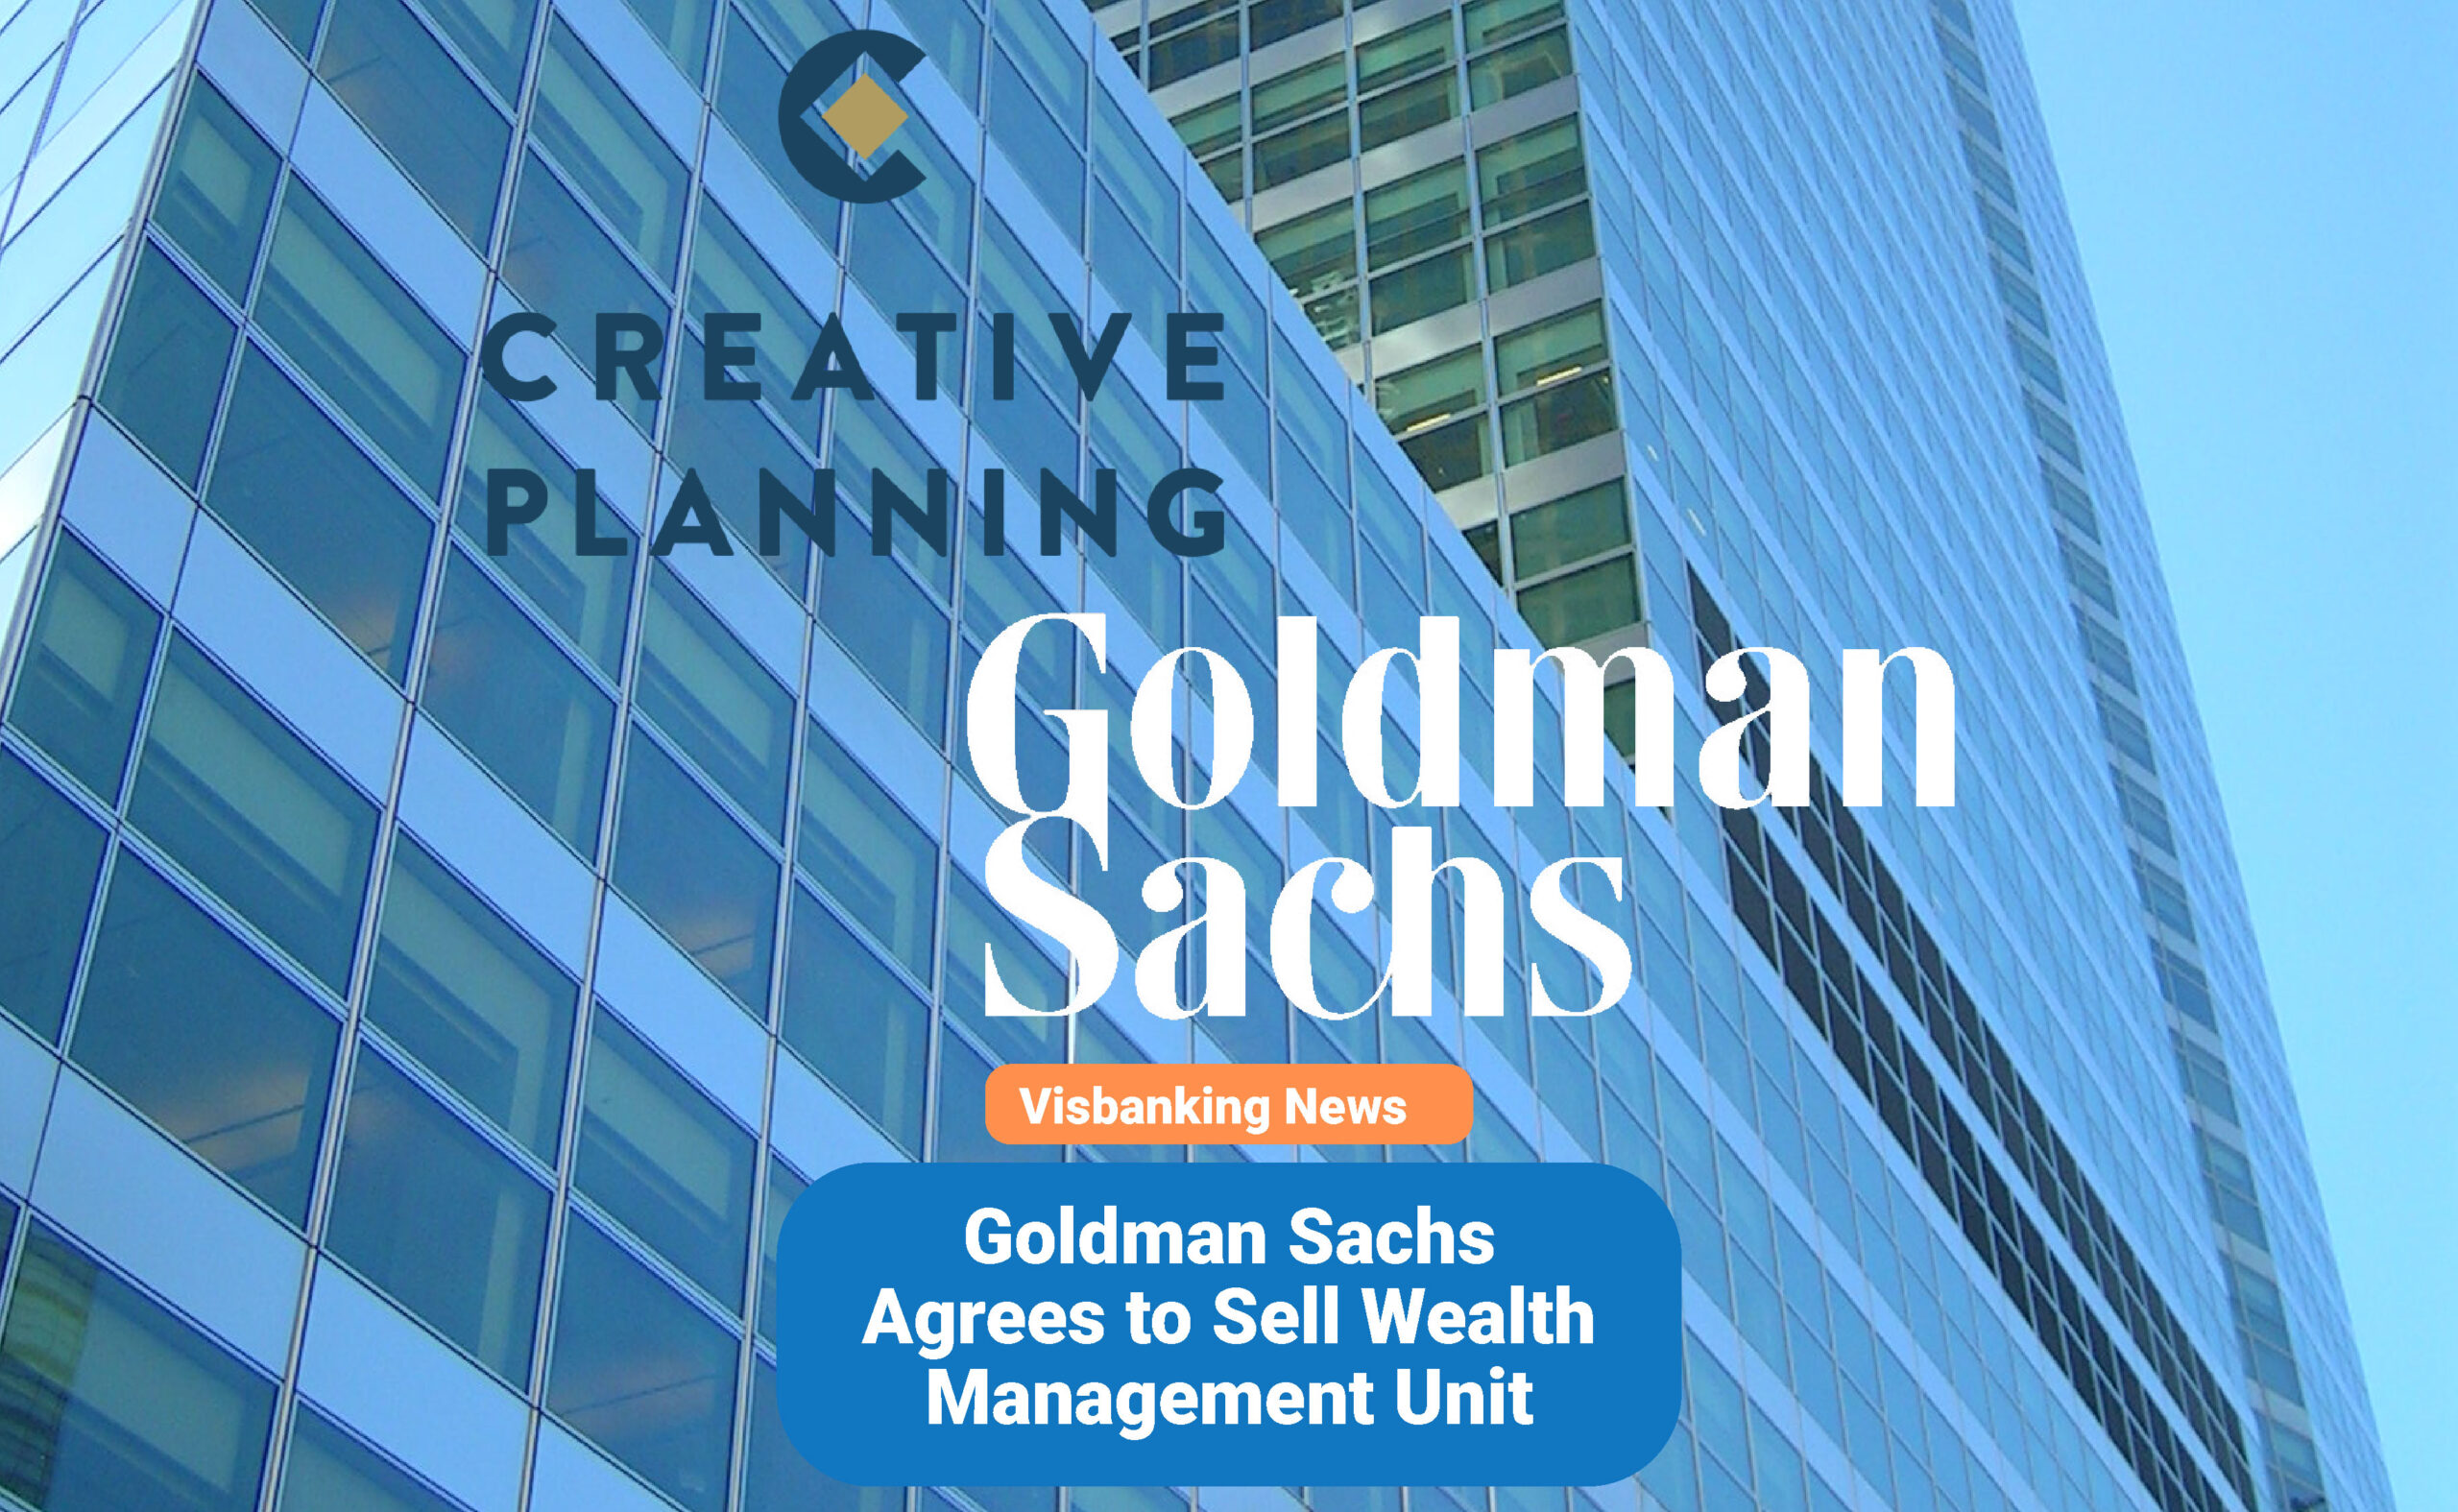 Goldman Sachs Agrees to Sell Wealth Management Unit